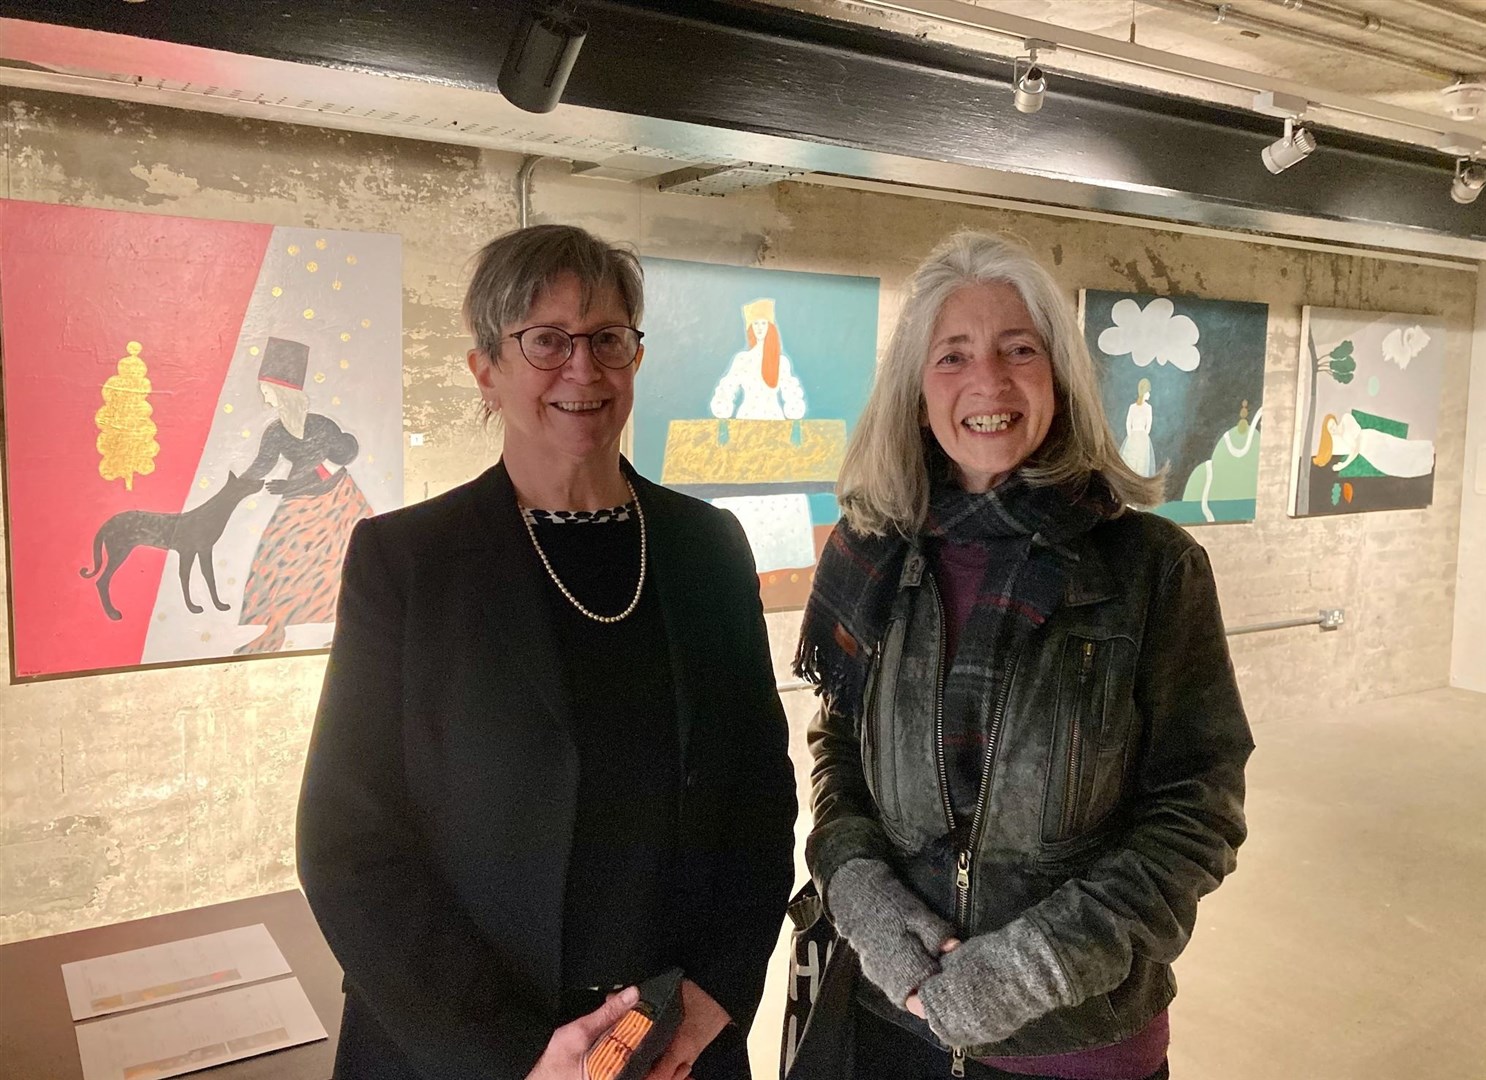 Exhibiting artists at Gairloch Museum, Celia Garbutt and Sadie Paige. Celia's artwork can be spotted in the background. Picture: Gairloch Museum.